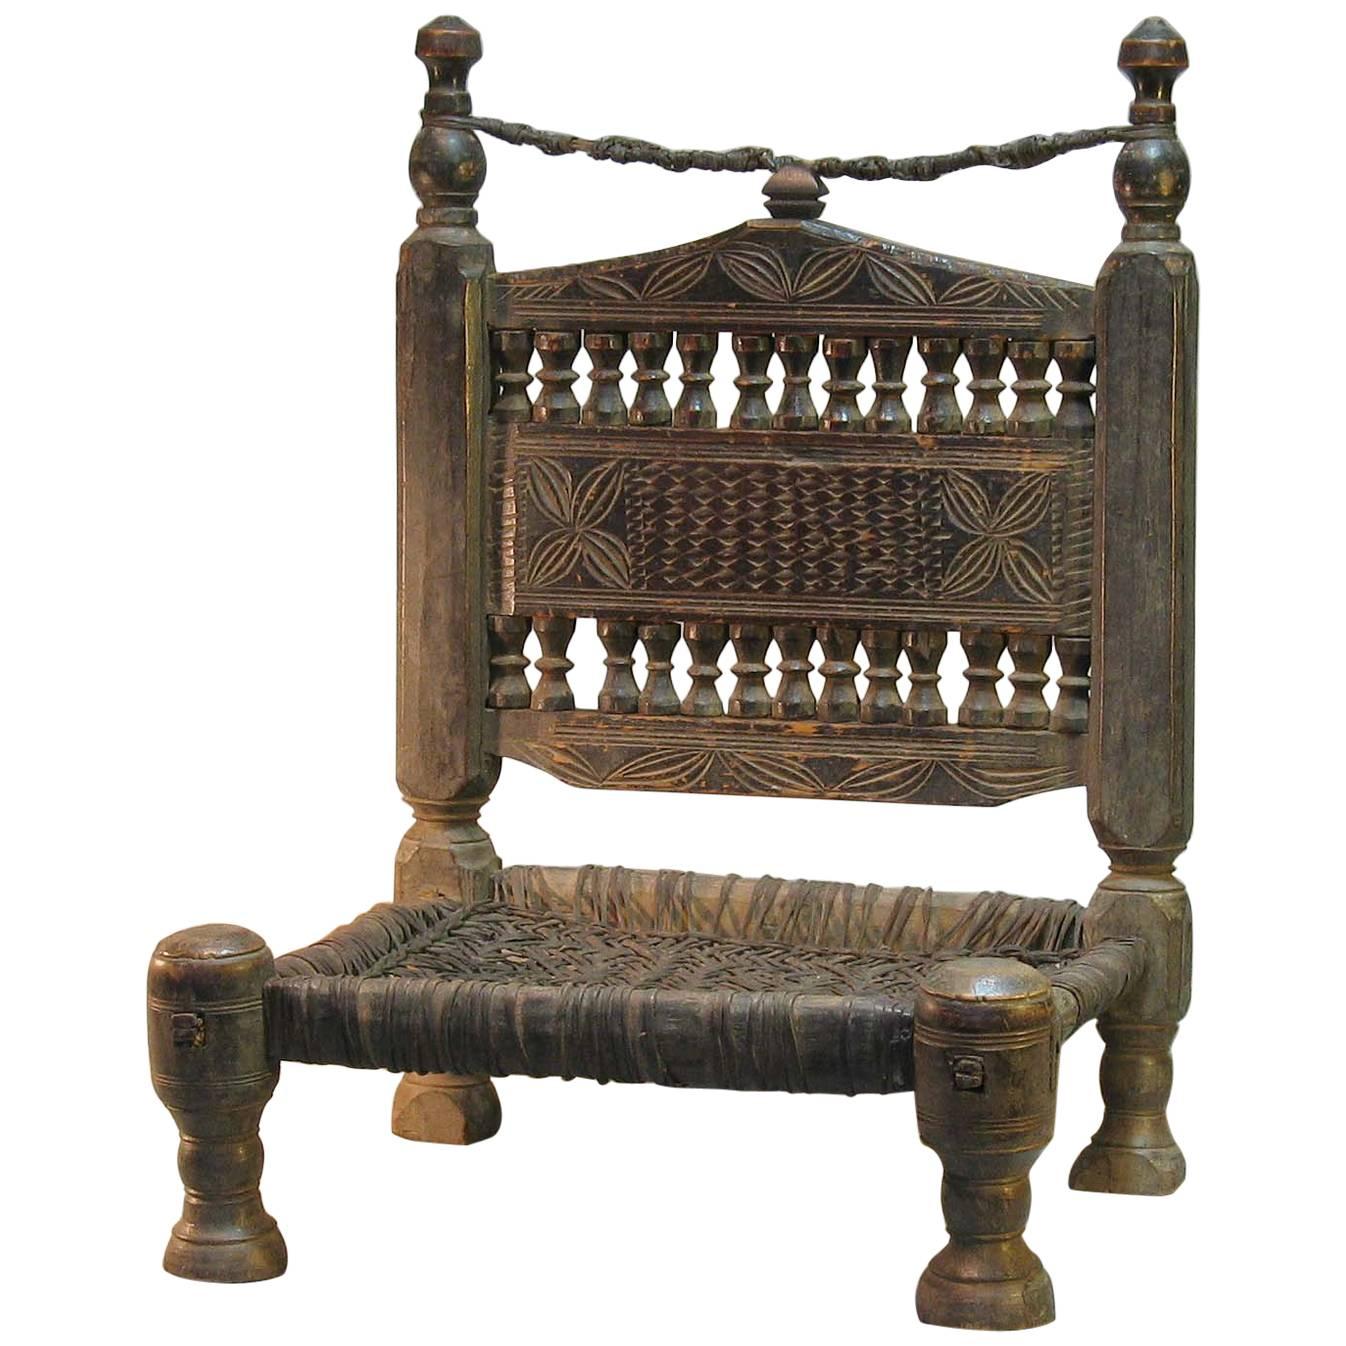 Traditional Tribal Chair of the Swat Valley, Northern Pakistan, 19th Century